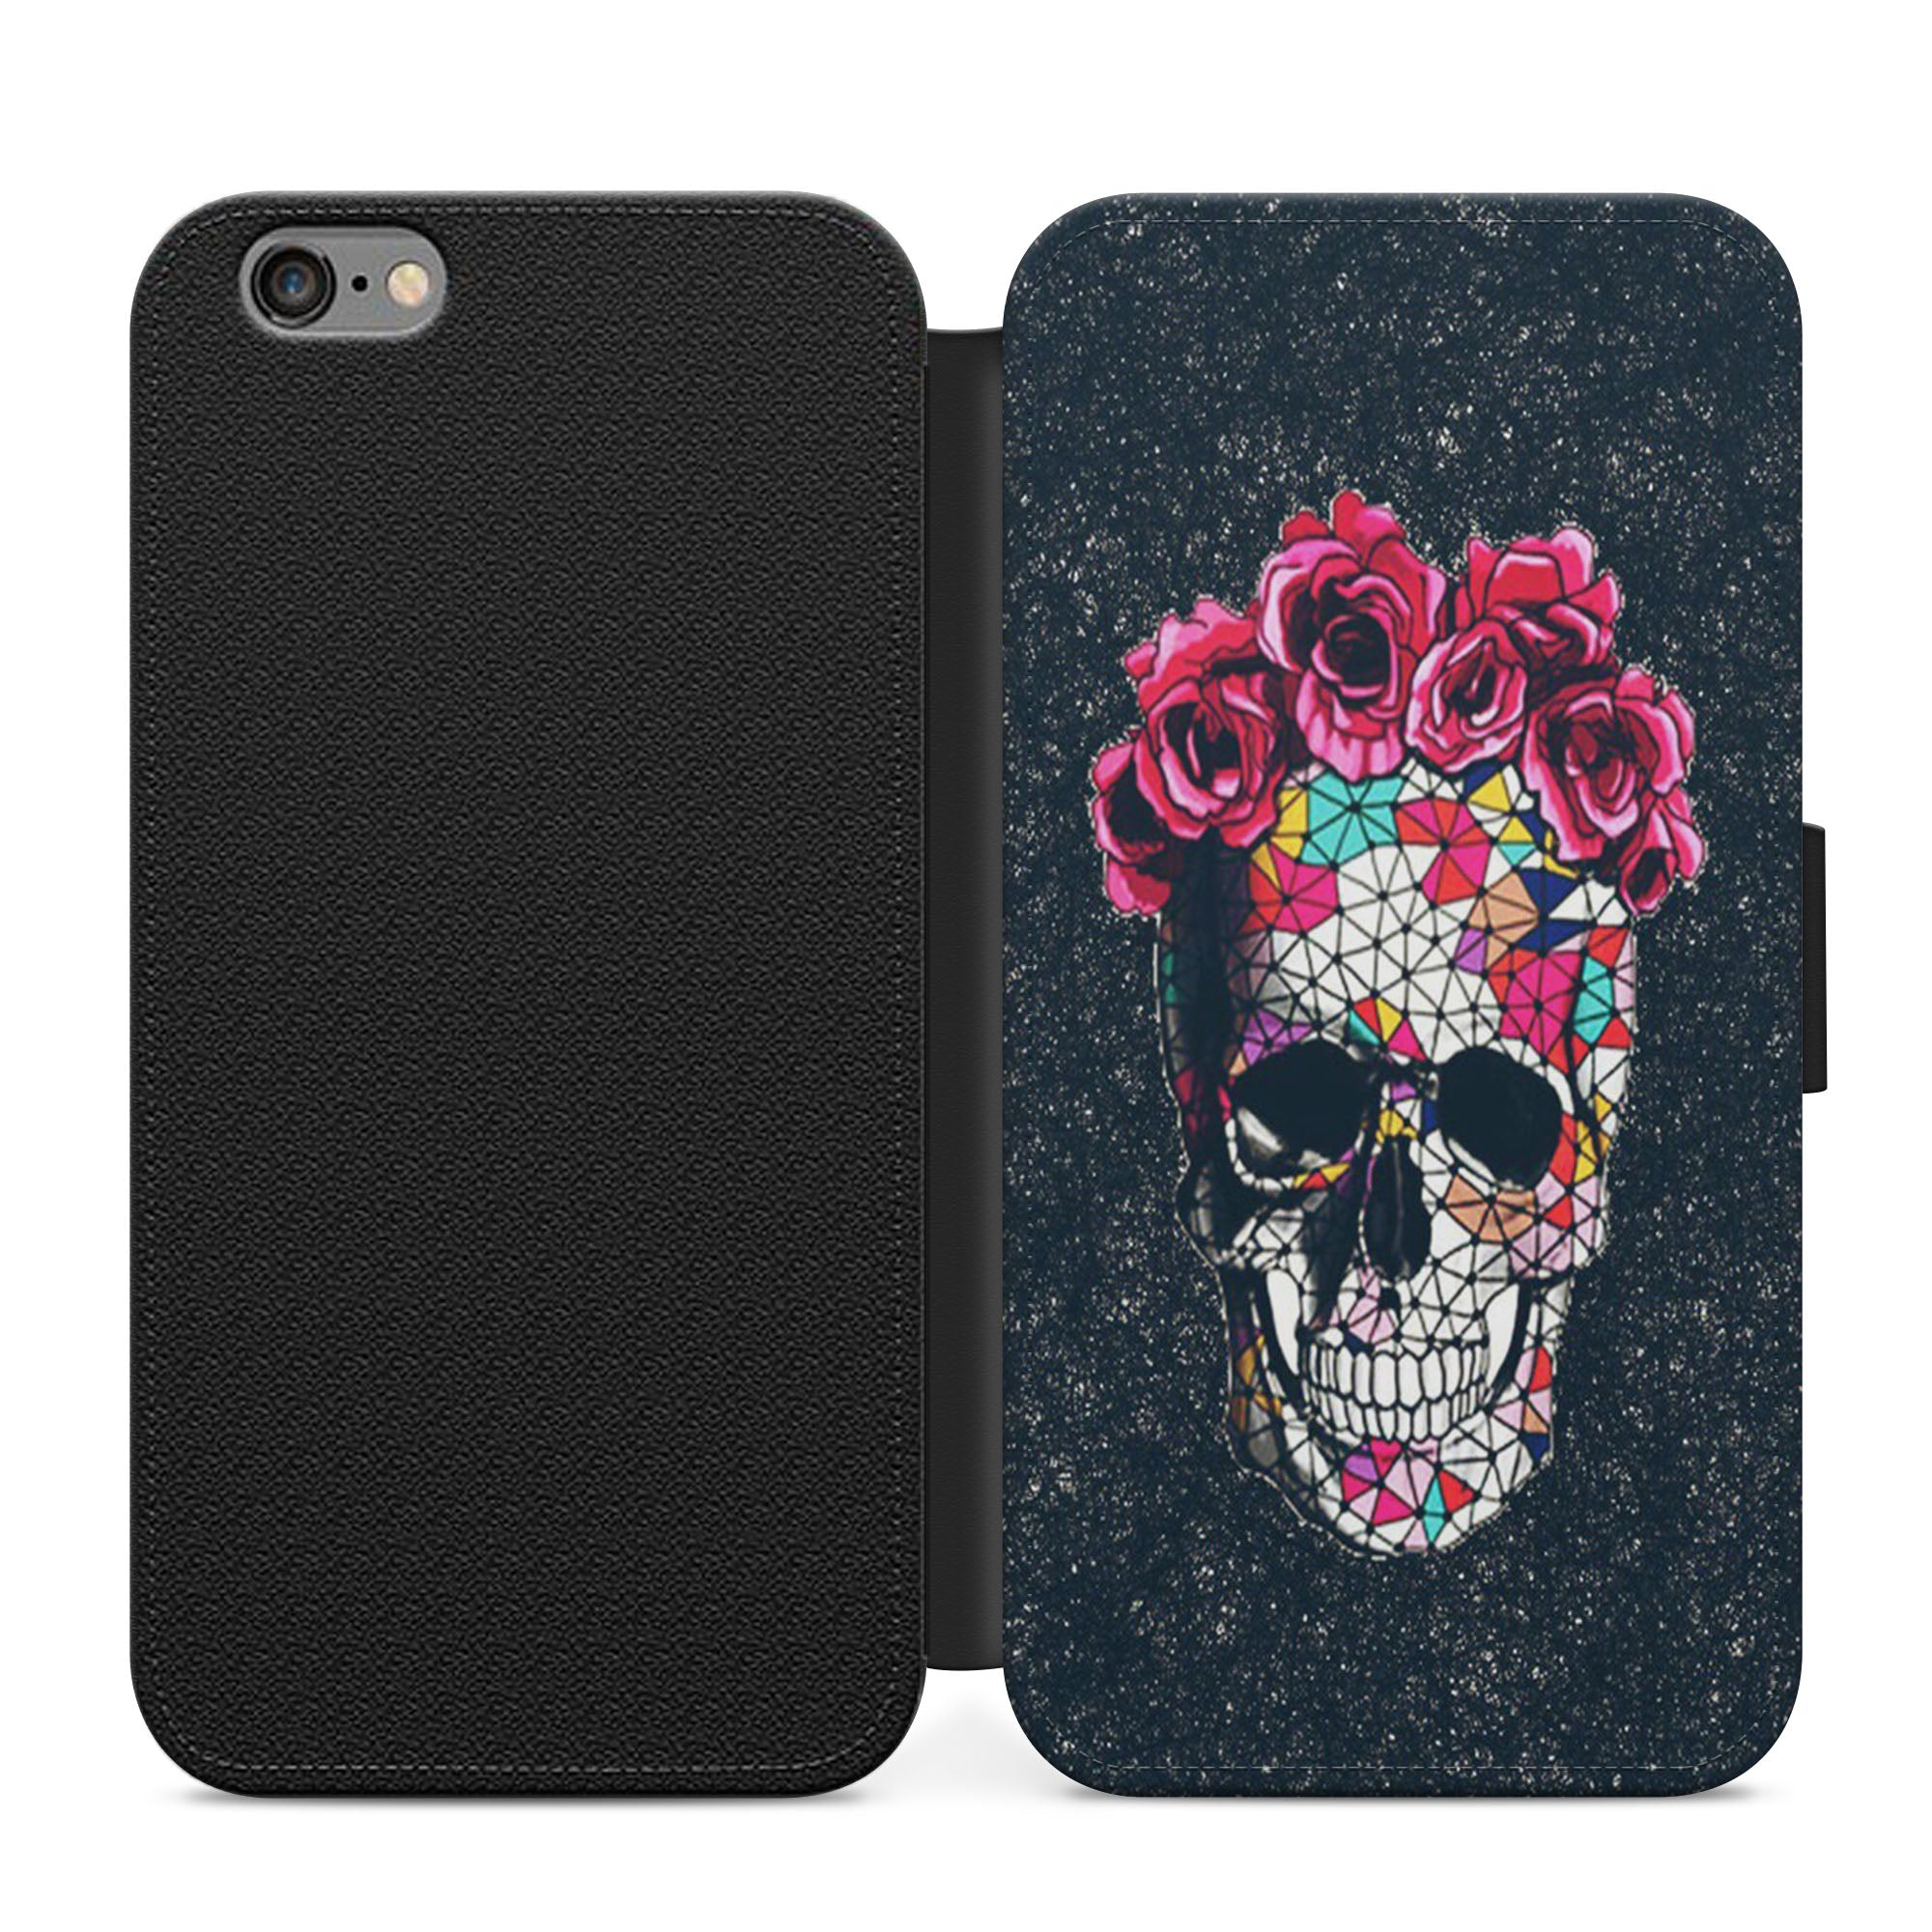 Floral Skull Faux Leather Flip Case Wallet for iPhone / Samsung